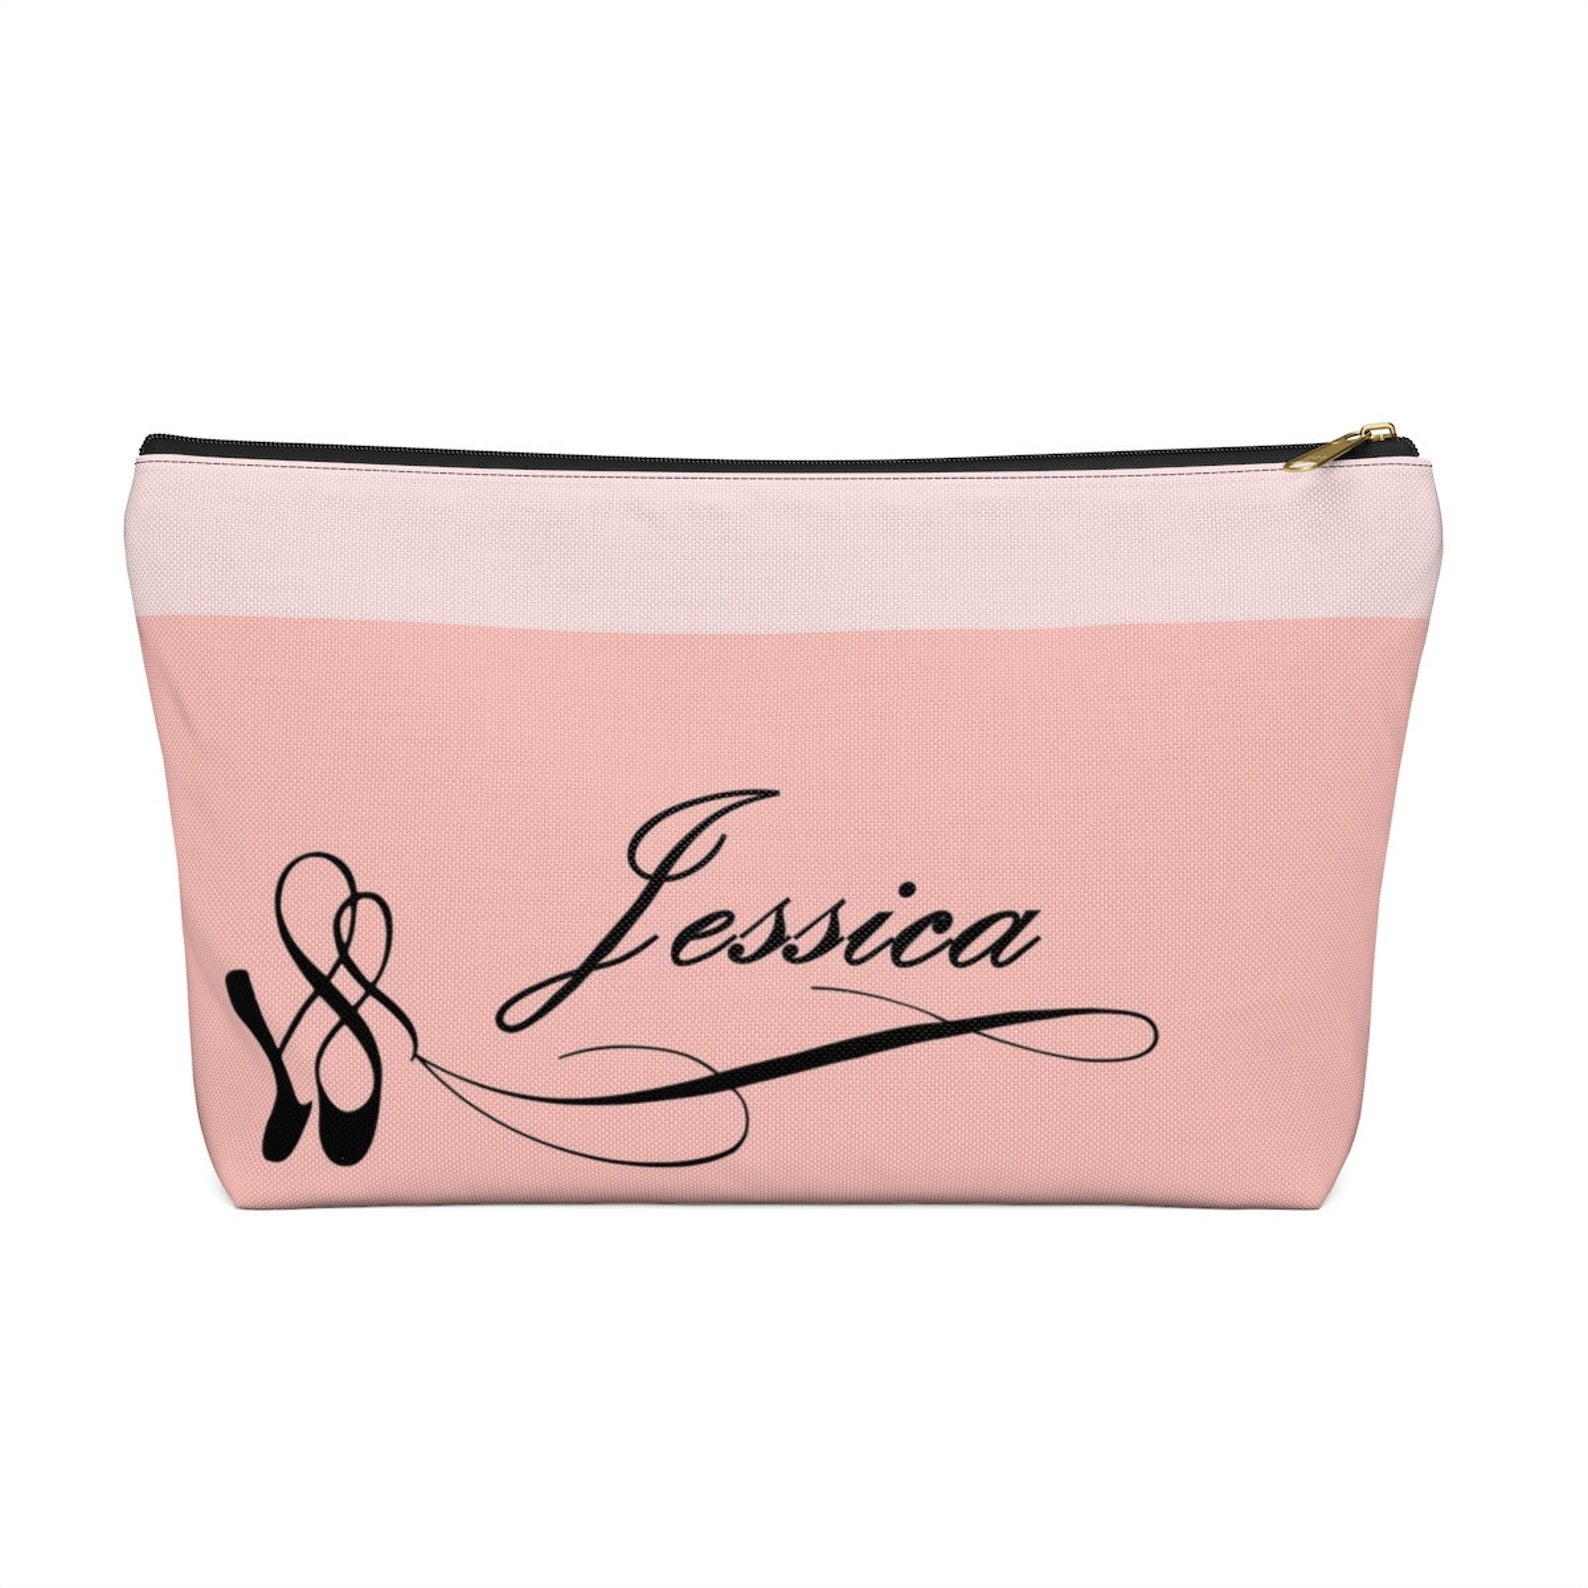 personalized #name #ballet #shoes #bag(s) / #pouch(es).free std.shipping in the usa.available in 2 sizes.ships worldwide.